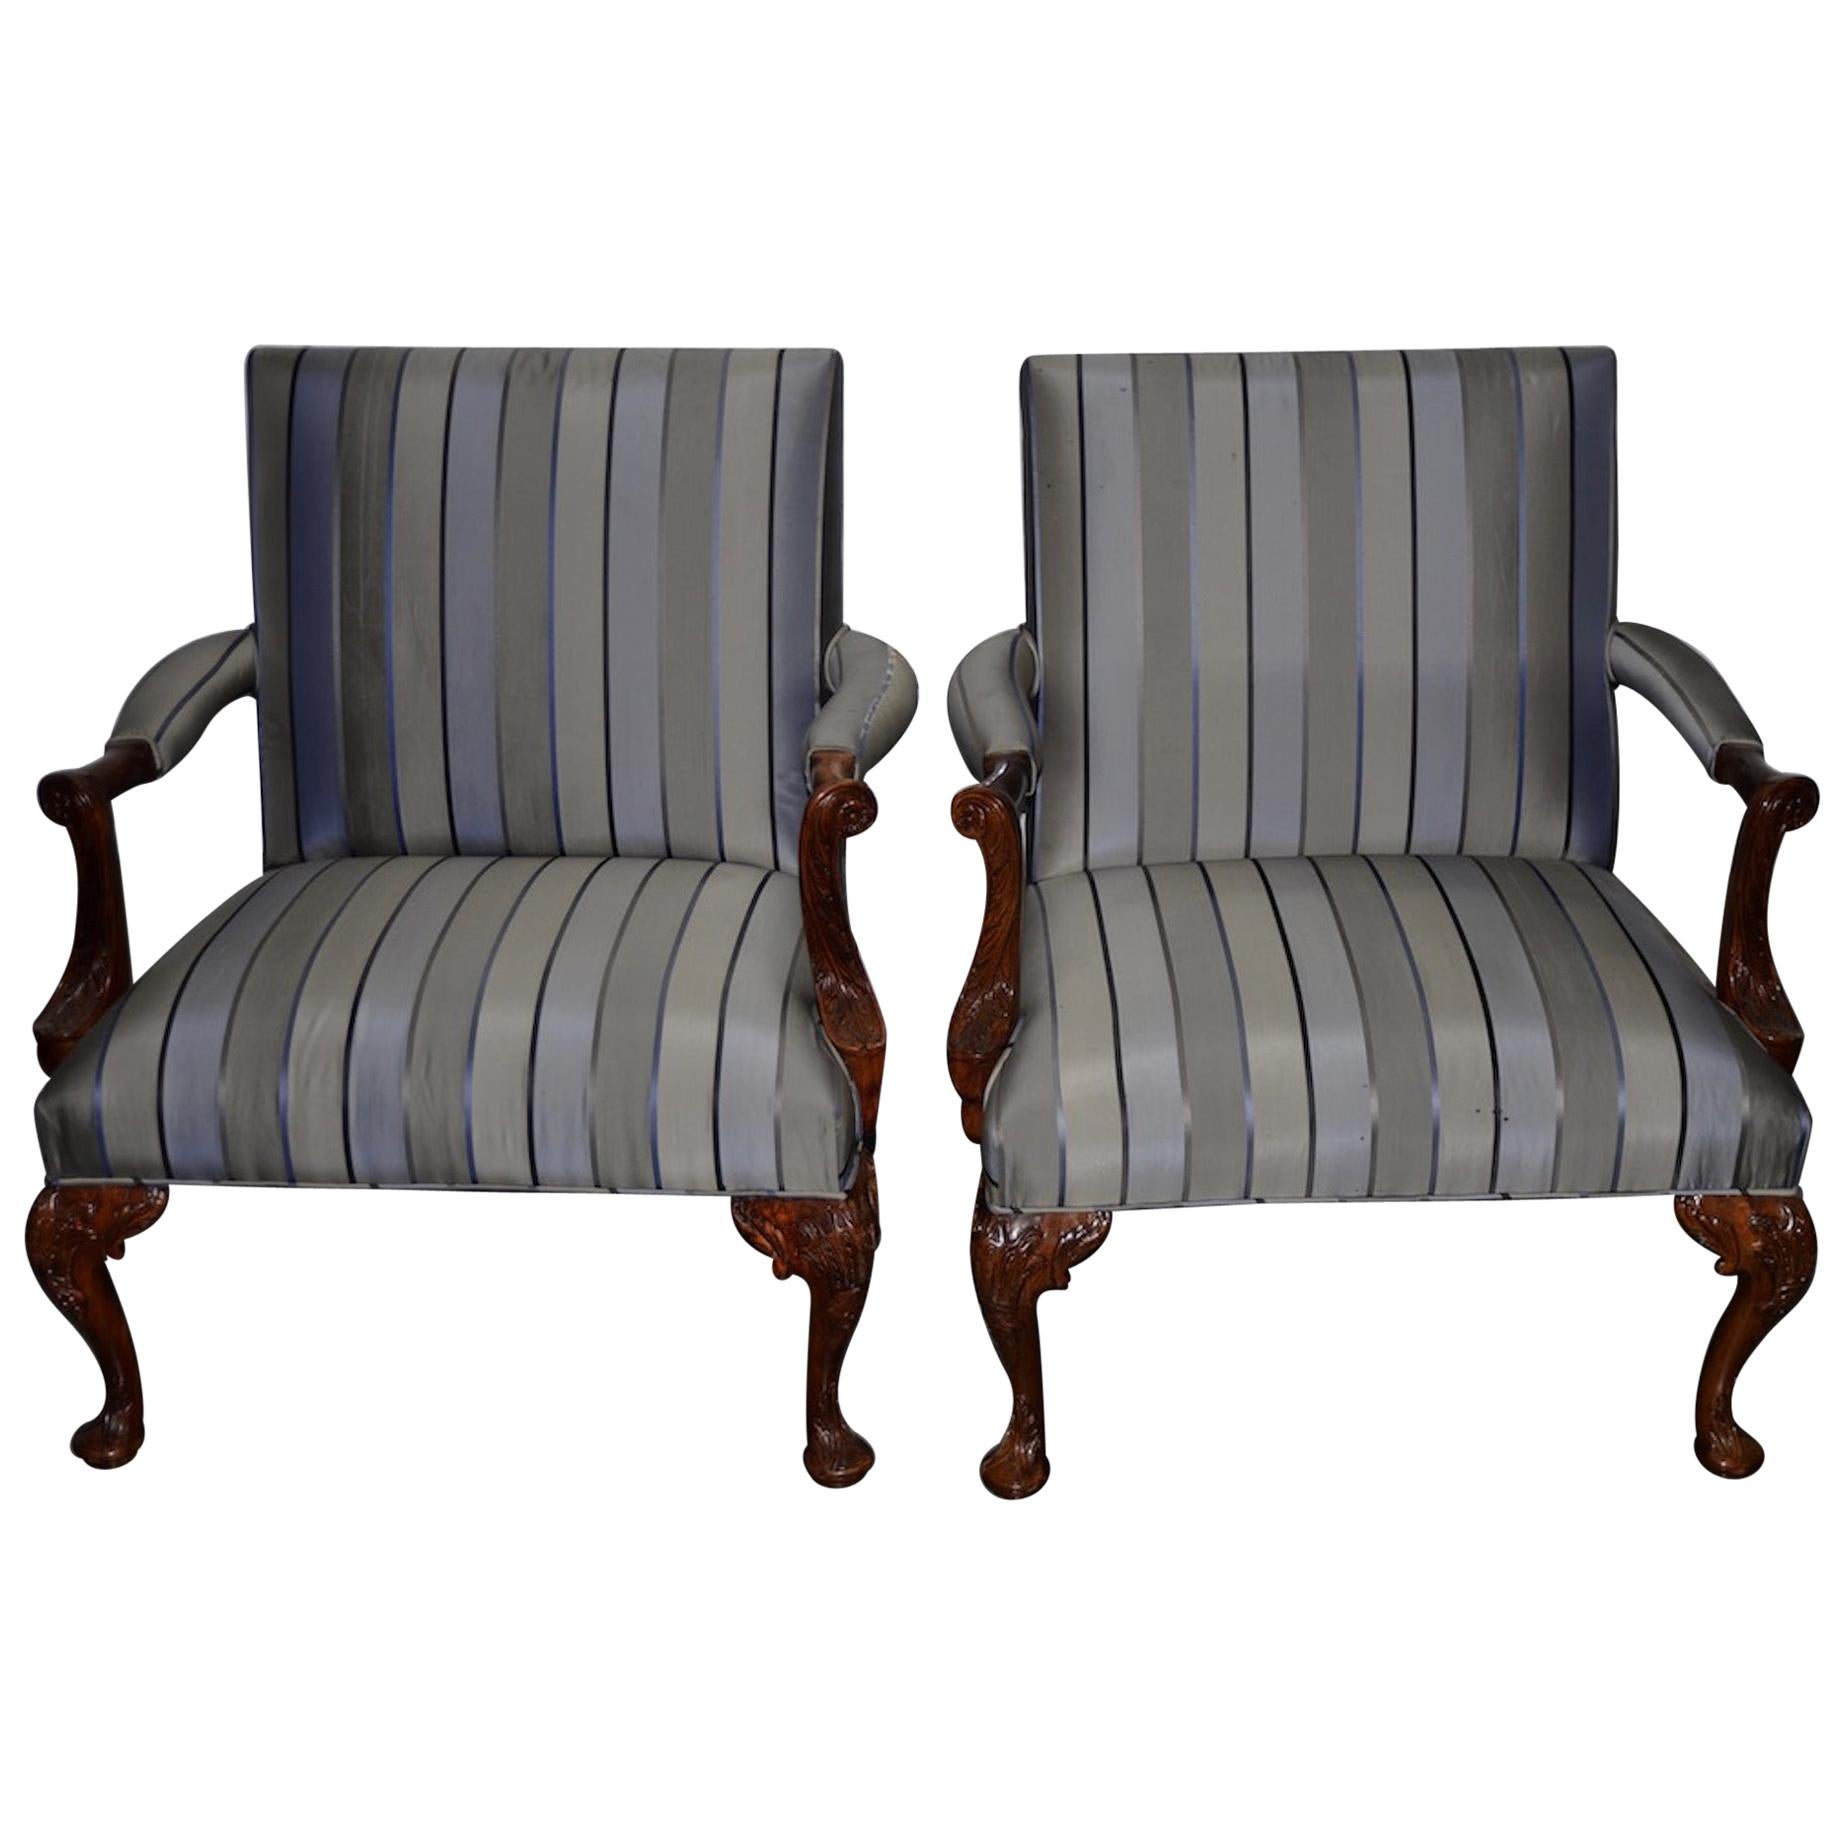 Pair of Matching Ralph Lauren Carved Mahogany and Upholstered Armchairs